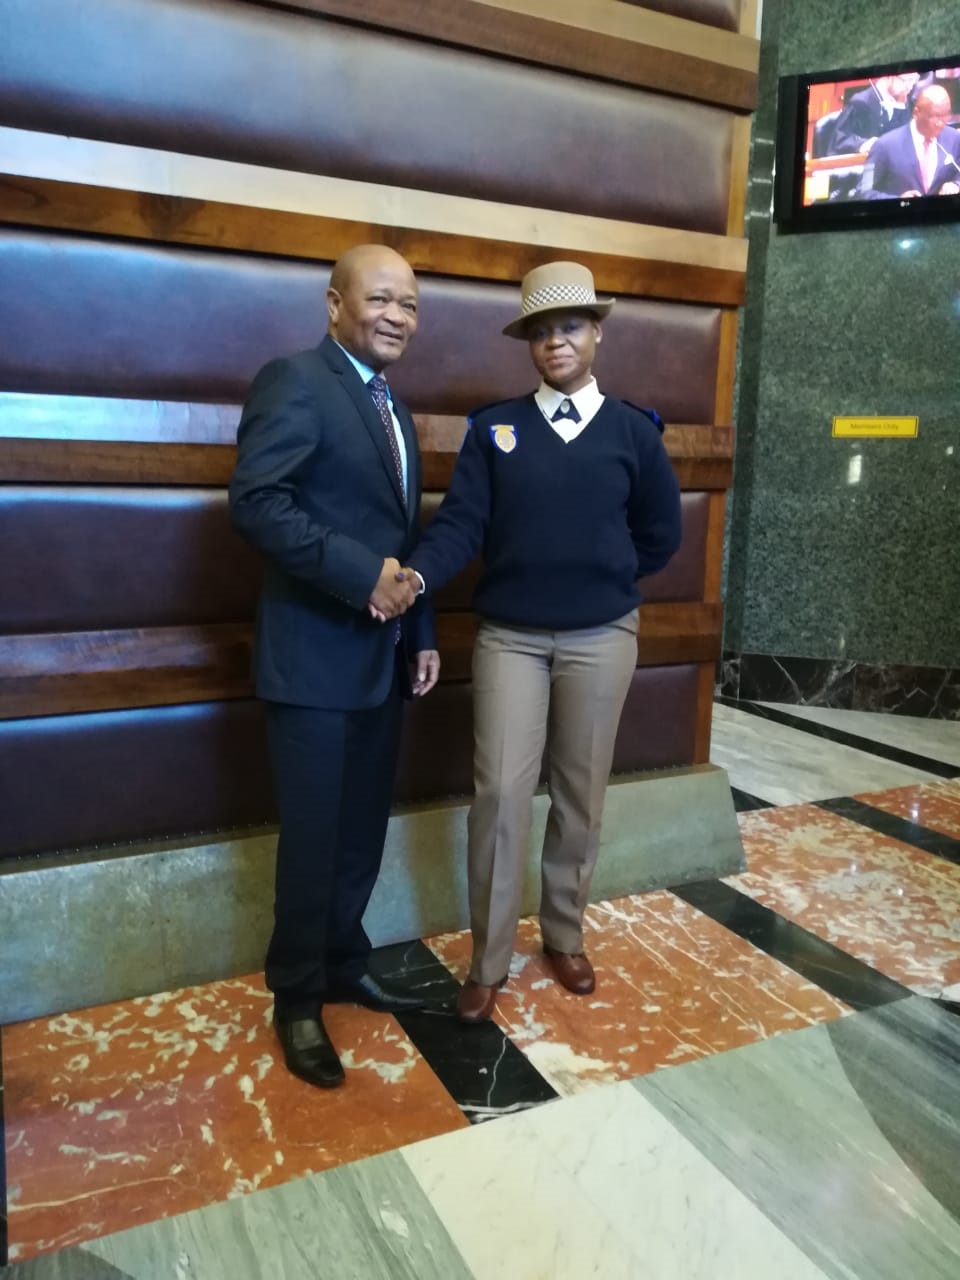 Public Service and Administration Minister Senzo Mchunu with ohannesburg Metro Police Department Officer Lebo Mngomezulu in Parliament